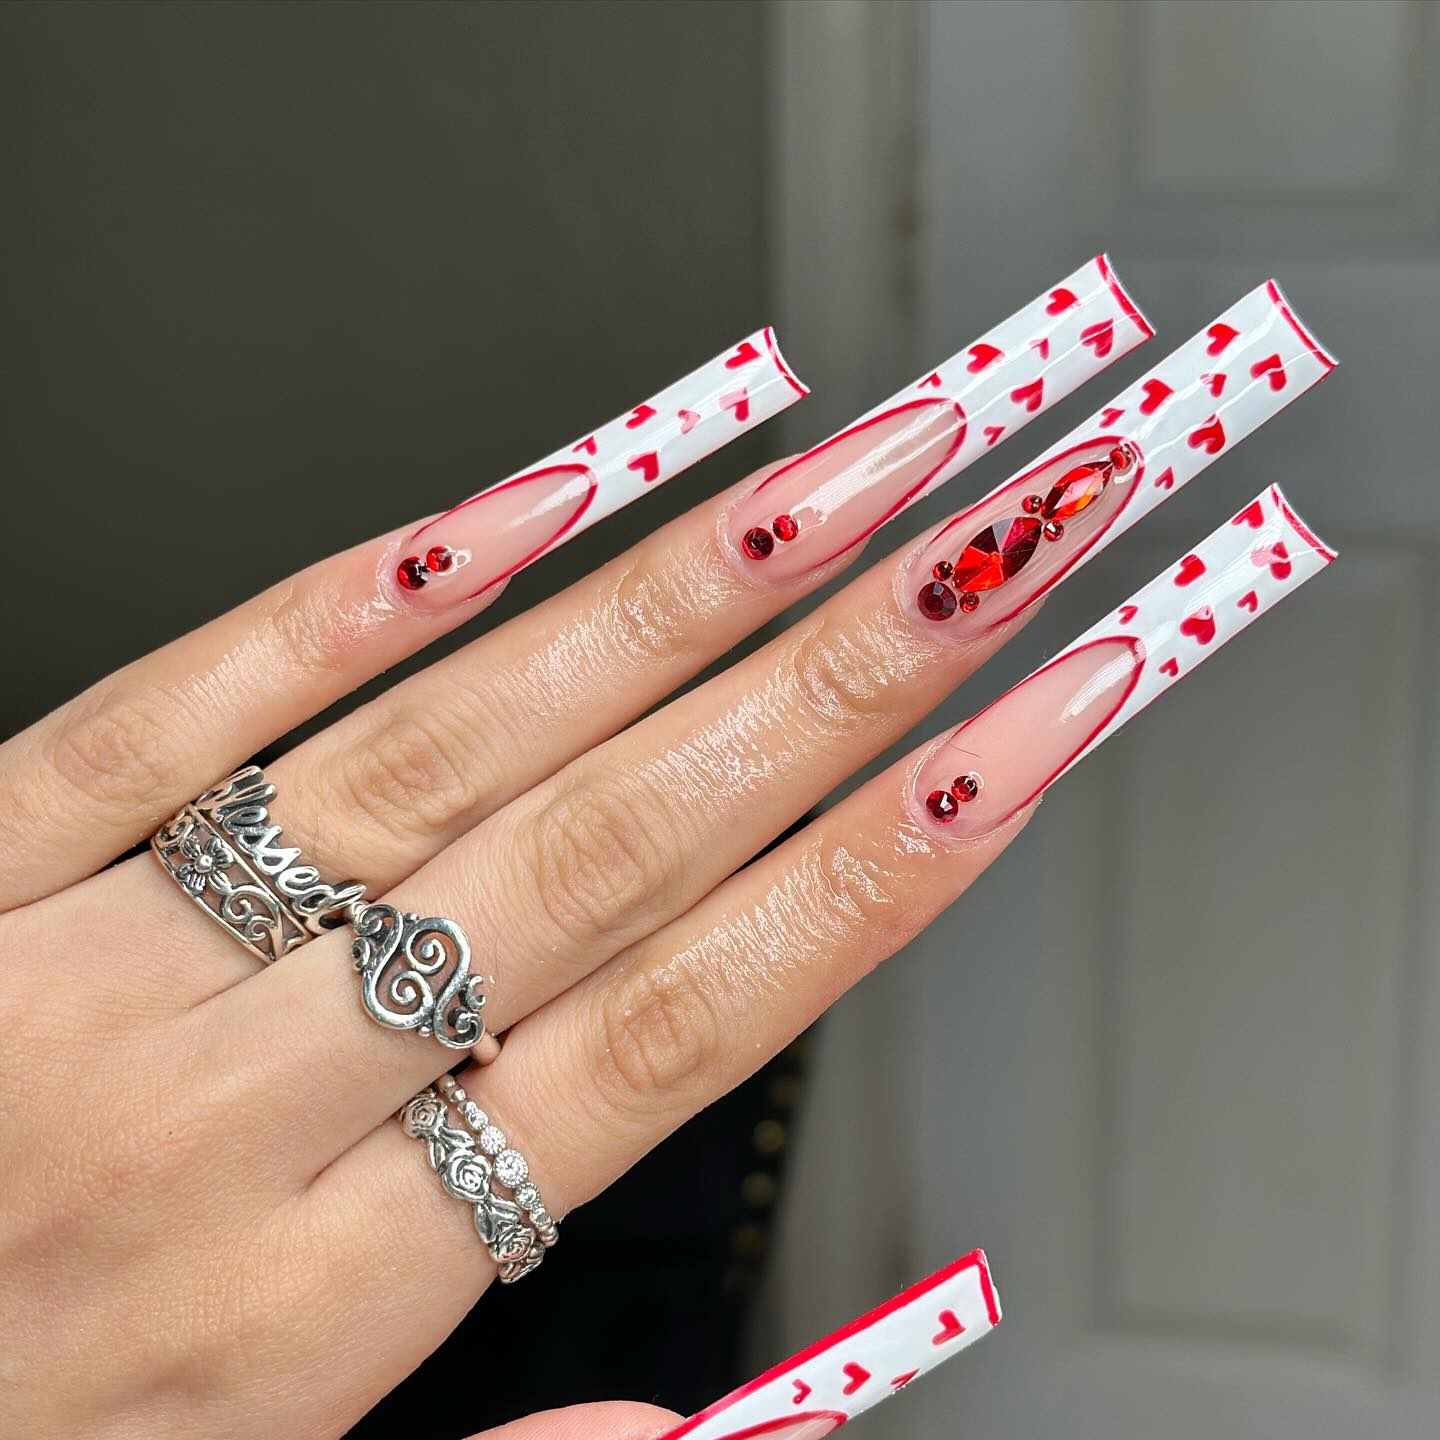 Scarlet Rose Valentine Nails With Heart Shapes